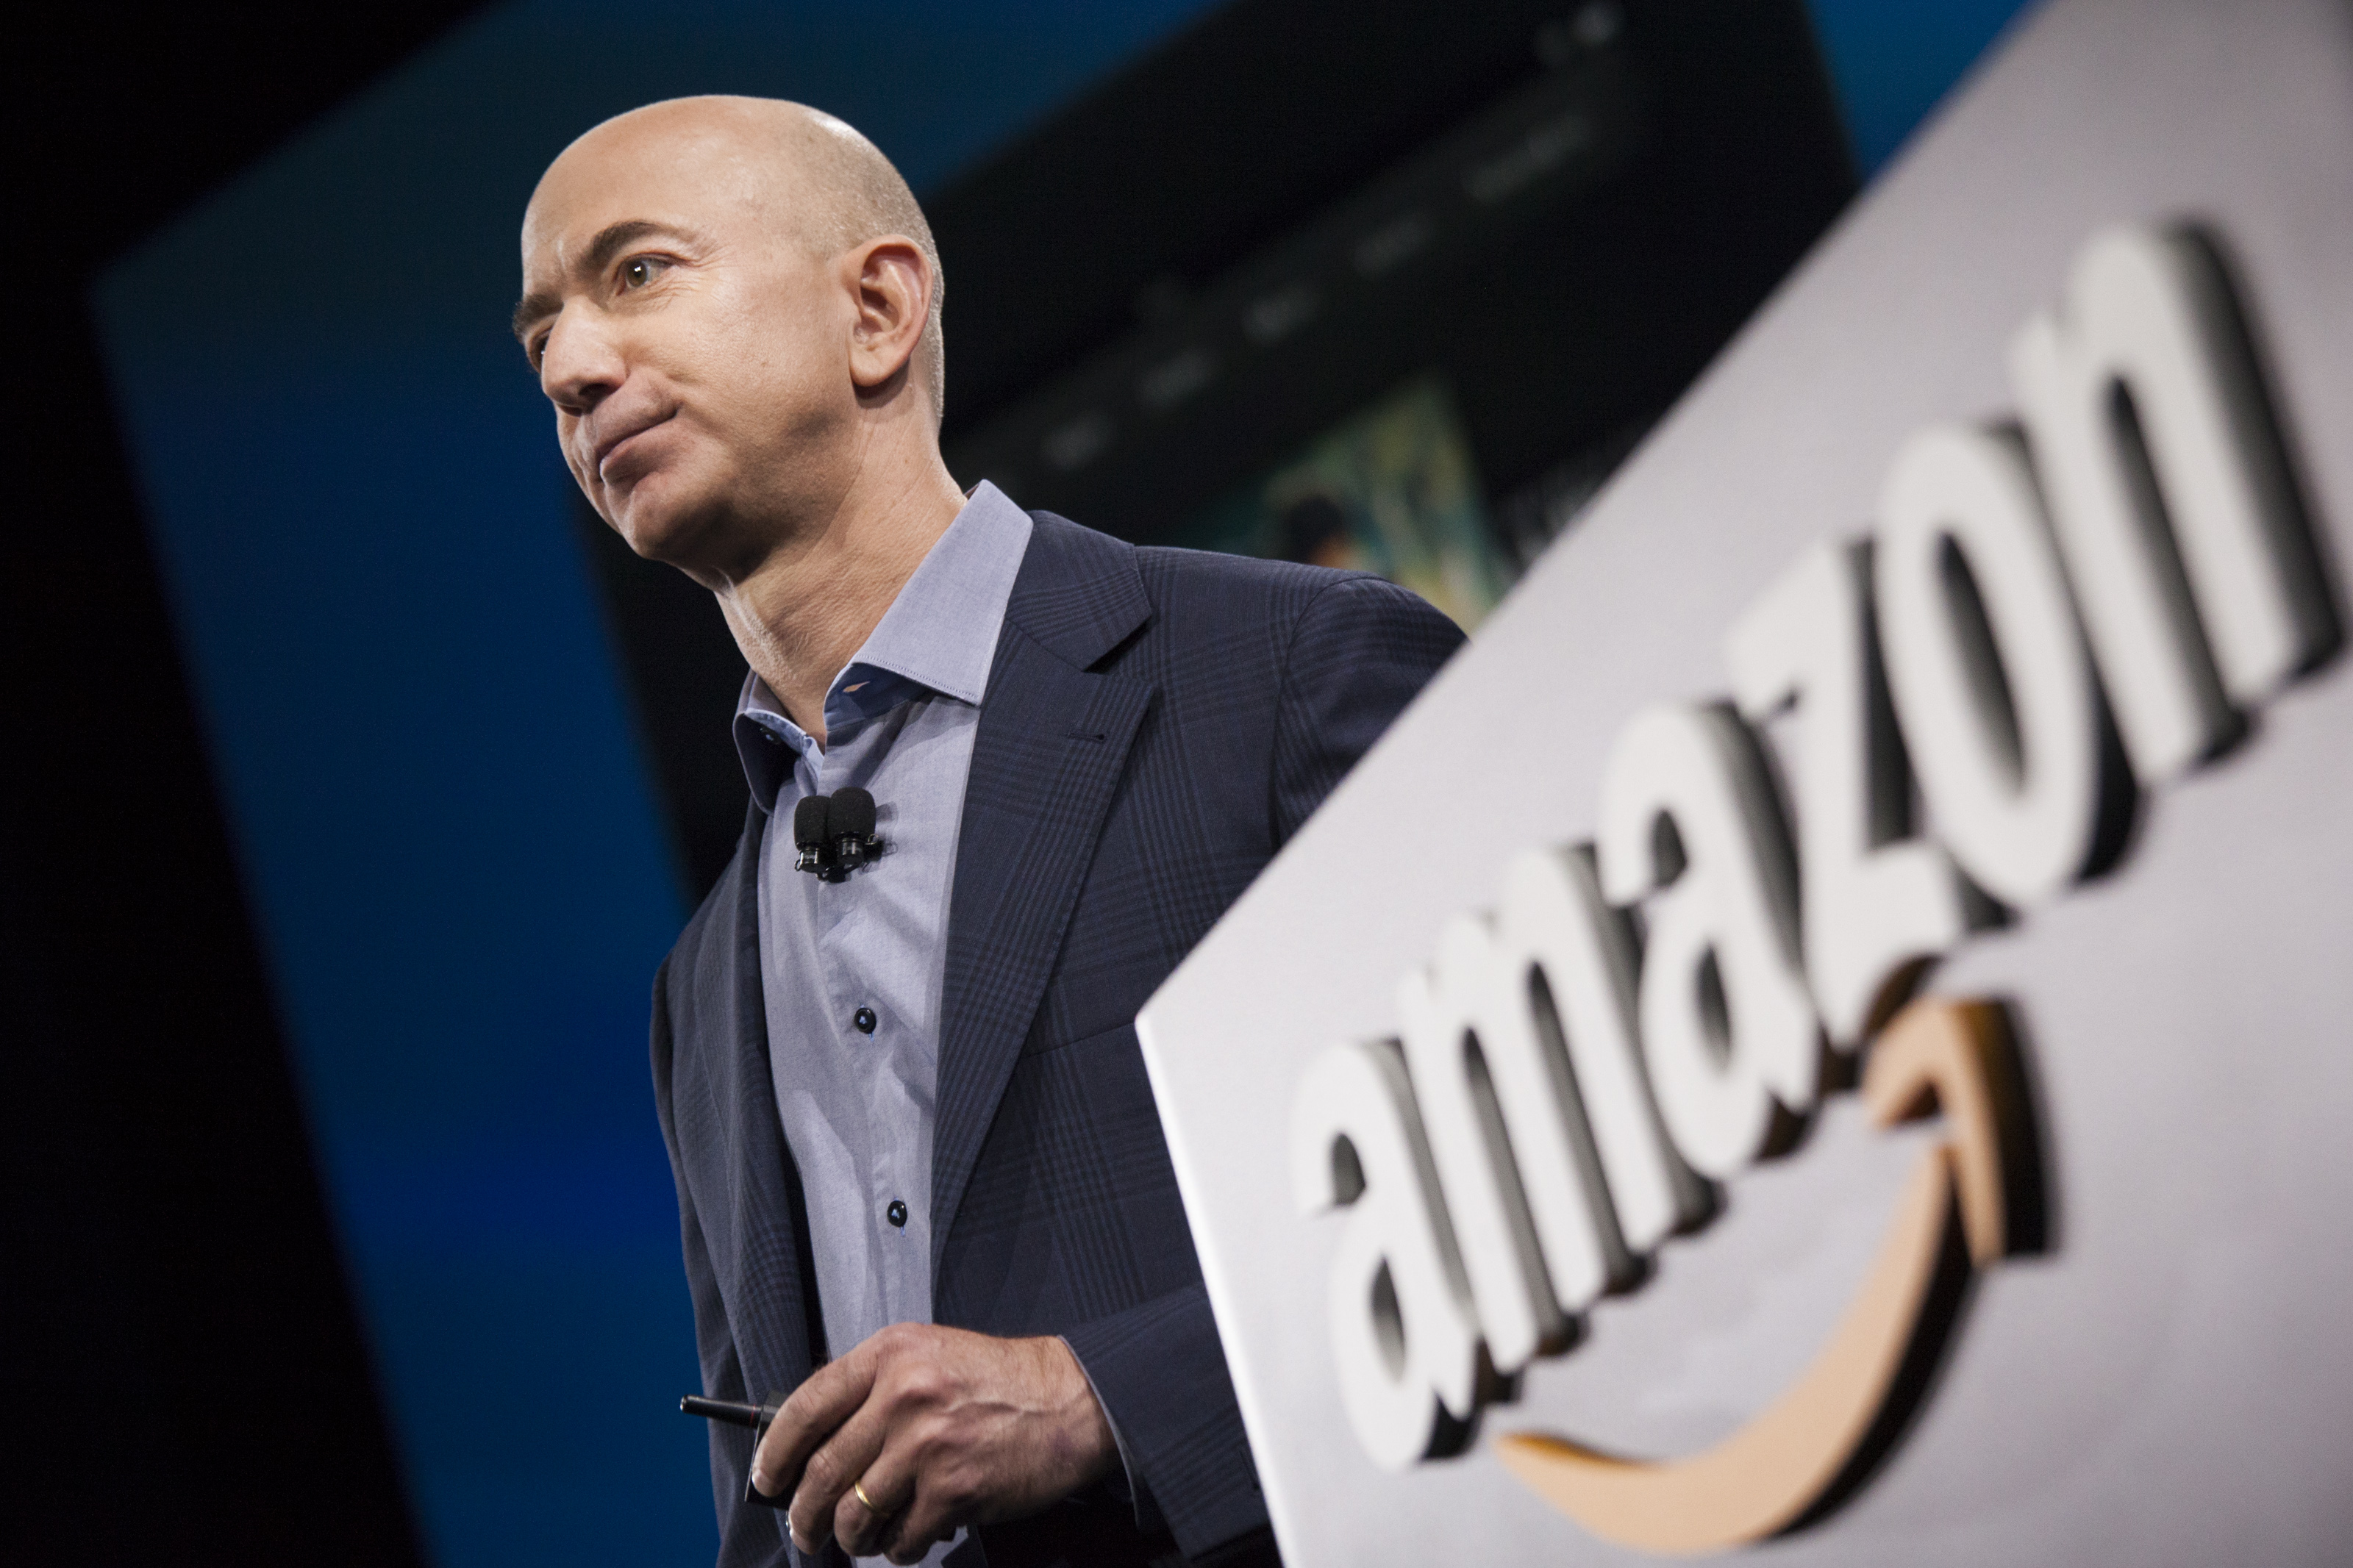 Amazon.com founder and CEO Jeff Bezos presents the company's first smartphone, the Fire Phone, on June 18, 2014 in Seattle, Washington. (David Ryder—Getty Images)